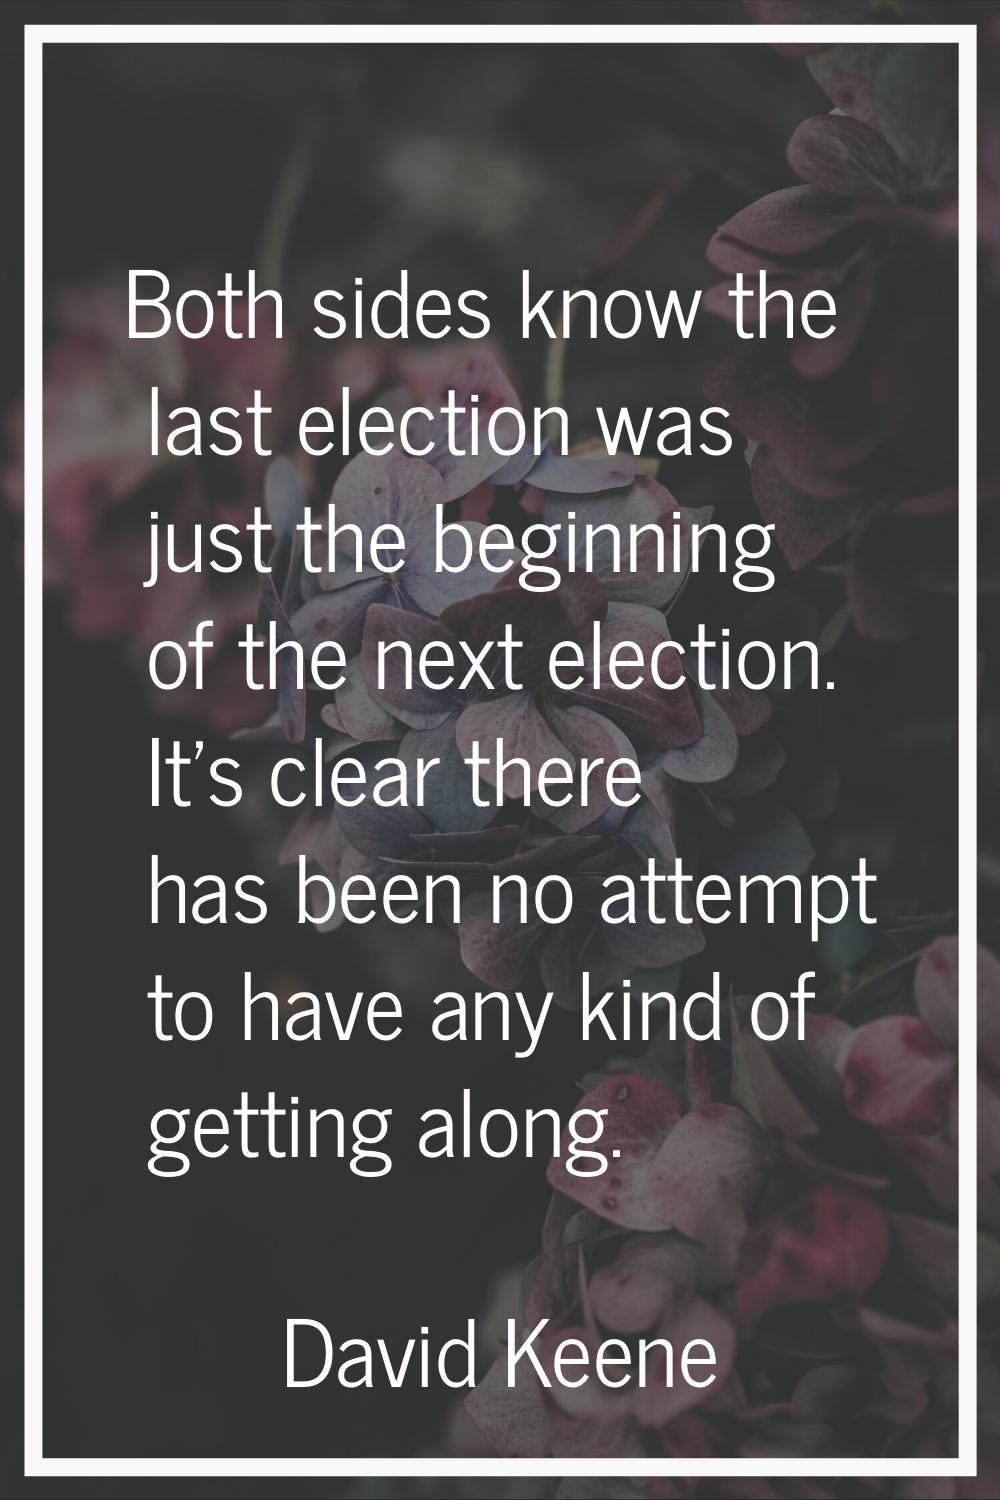 Both sides know the last election was just the beginning of the next election. It's clear there has